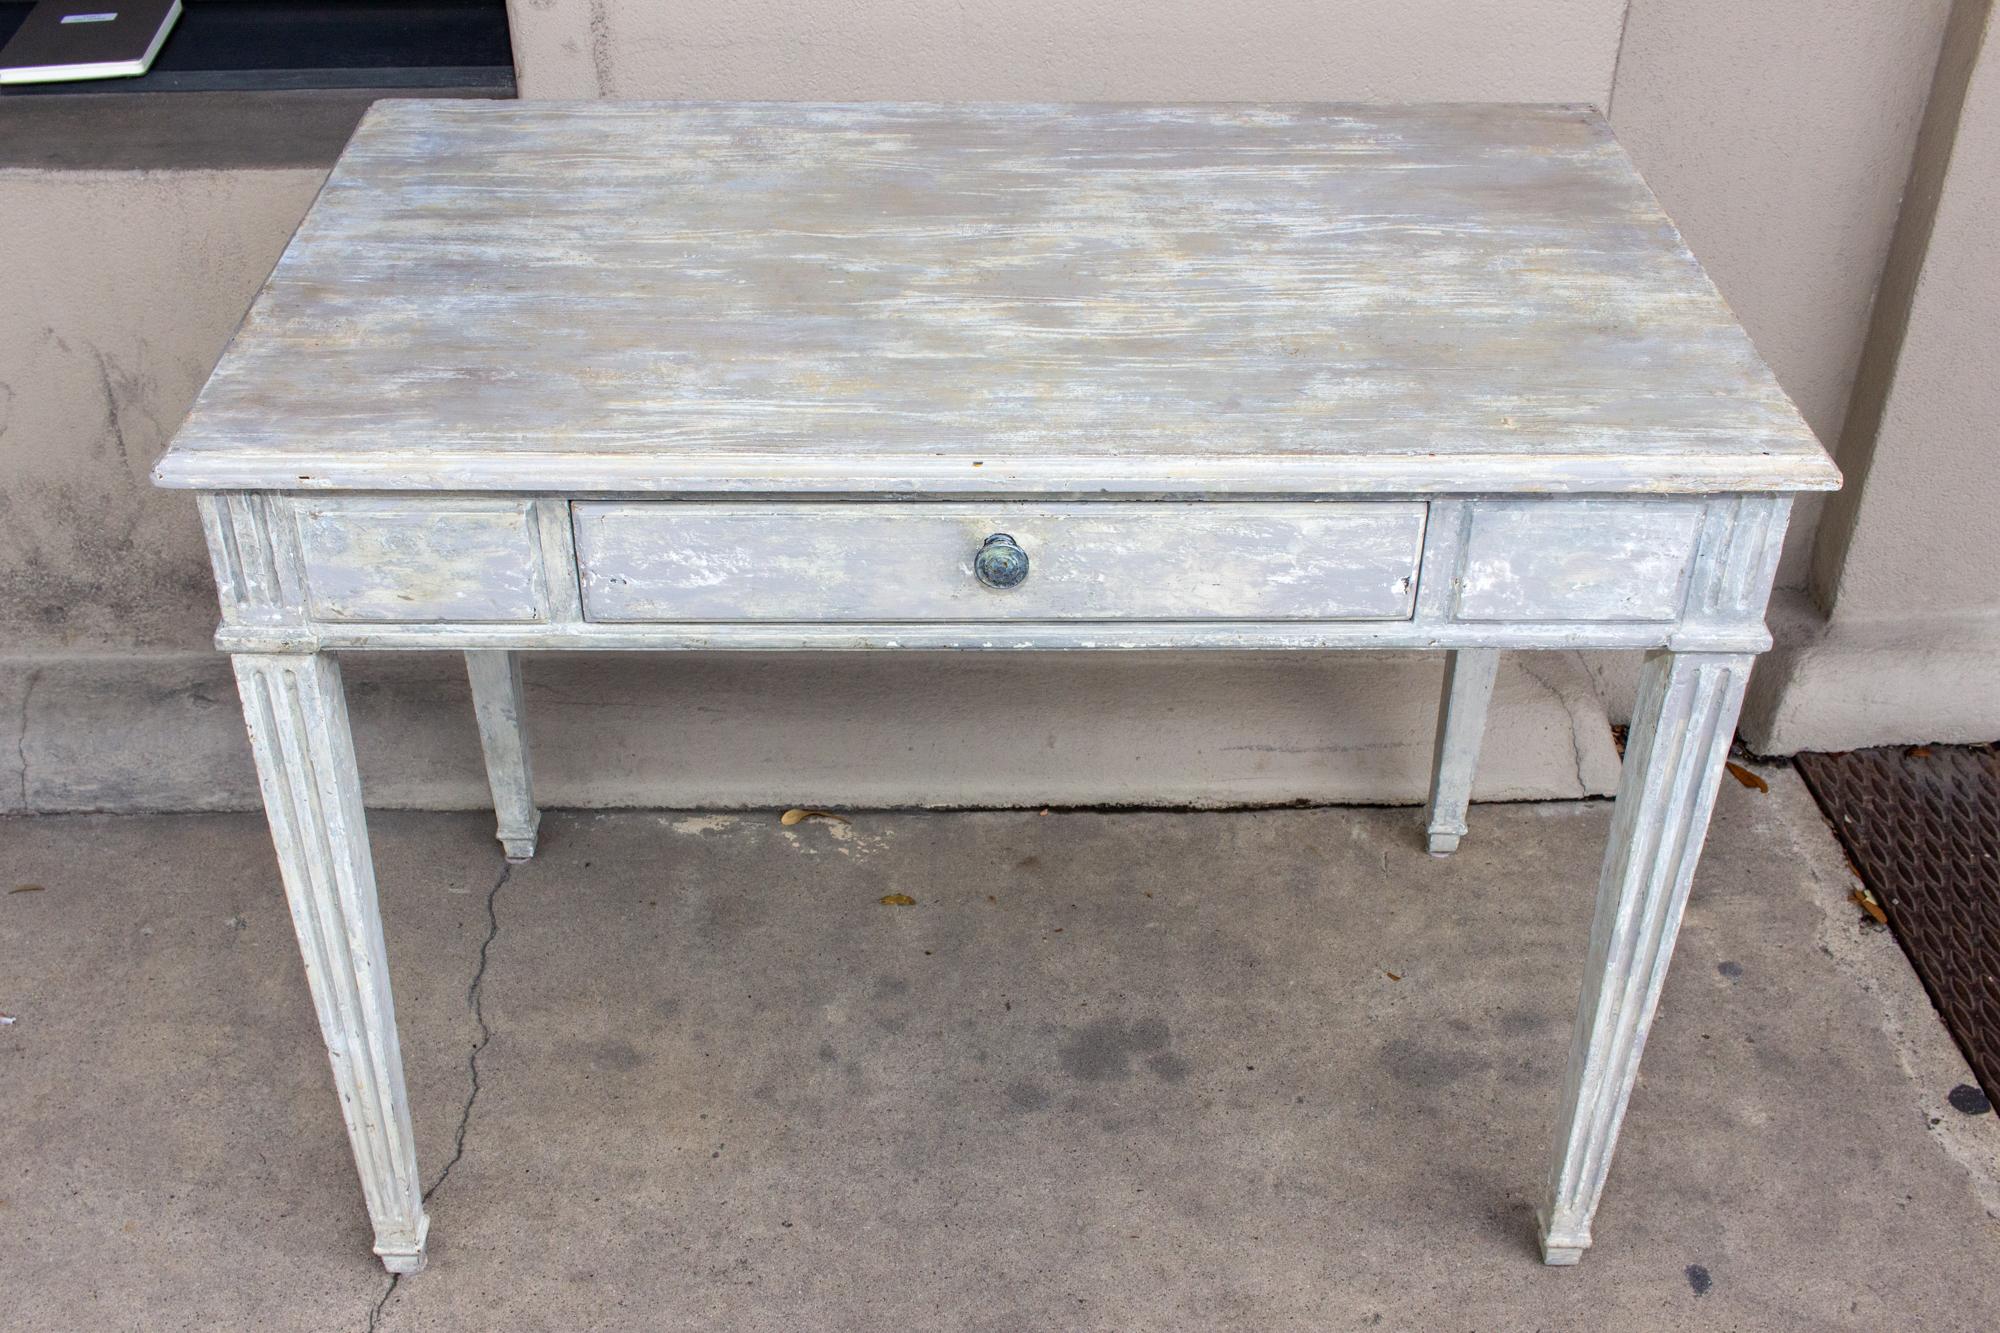 A charming and useful vintage French solid wood desk with a beautifully hand-painted greige finish. There is a single center drawer at front with generous storage space and a simple round pull. The legs are tapered with fluted details that continue